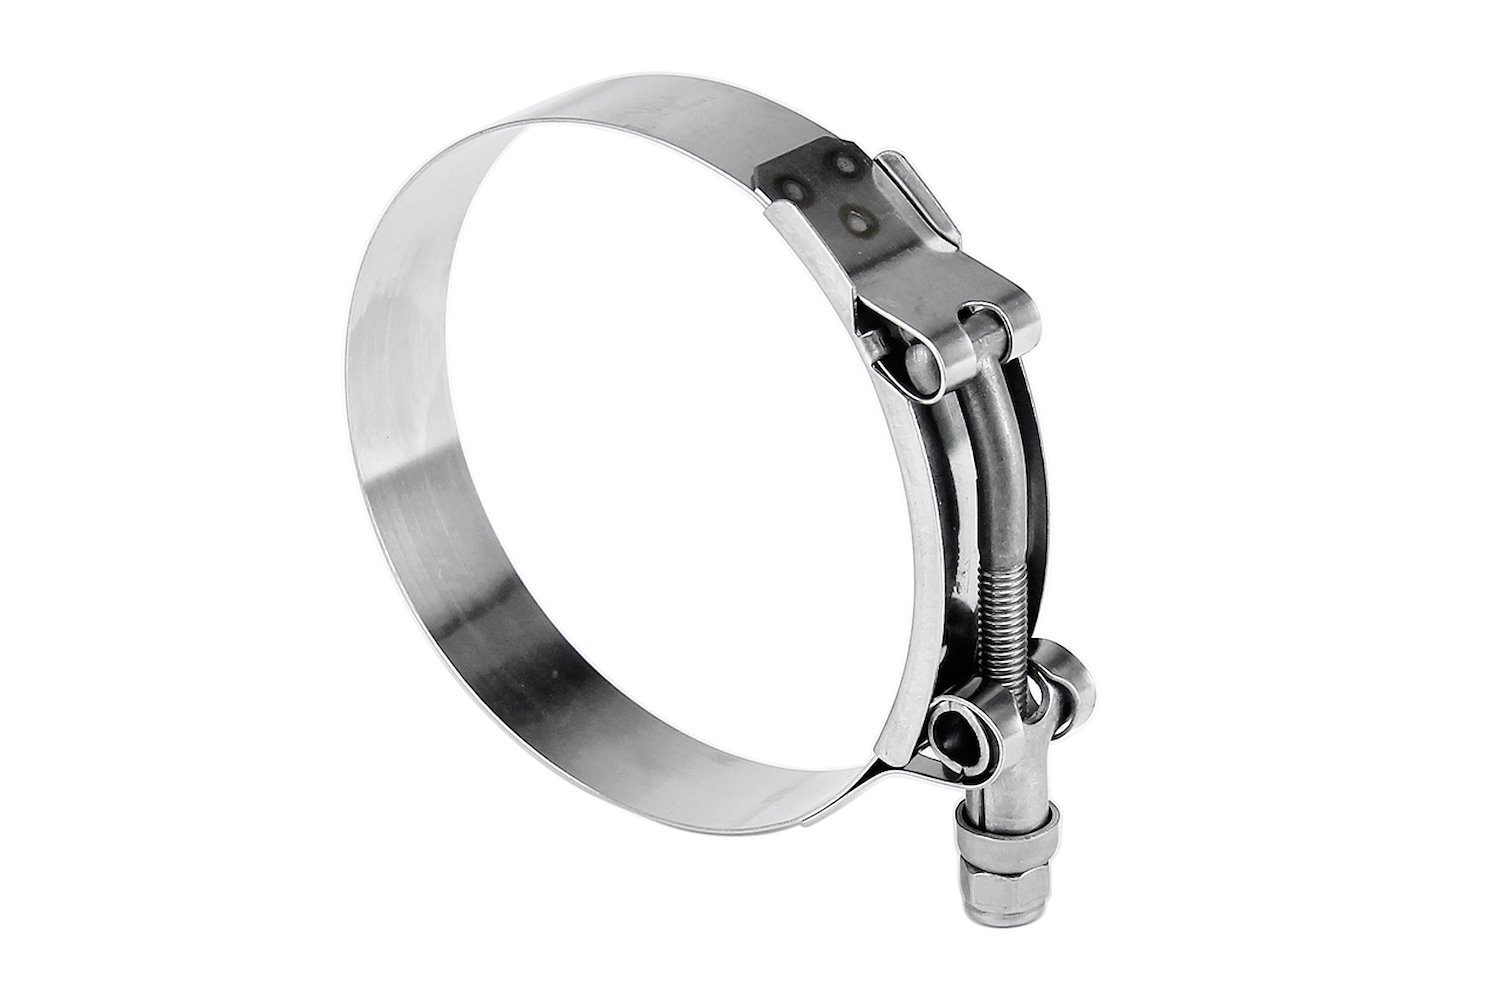 316-SSTC-140-148 100-Percent Marine Grade Stainless Steel T-Bolt Hose Clamp, Size #148, Range: 5.5 in.- 5.81 in.